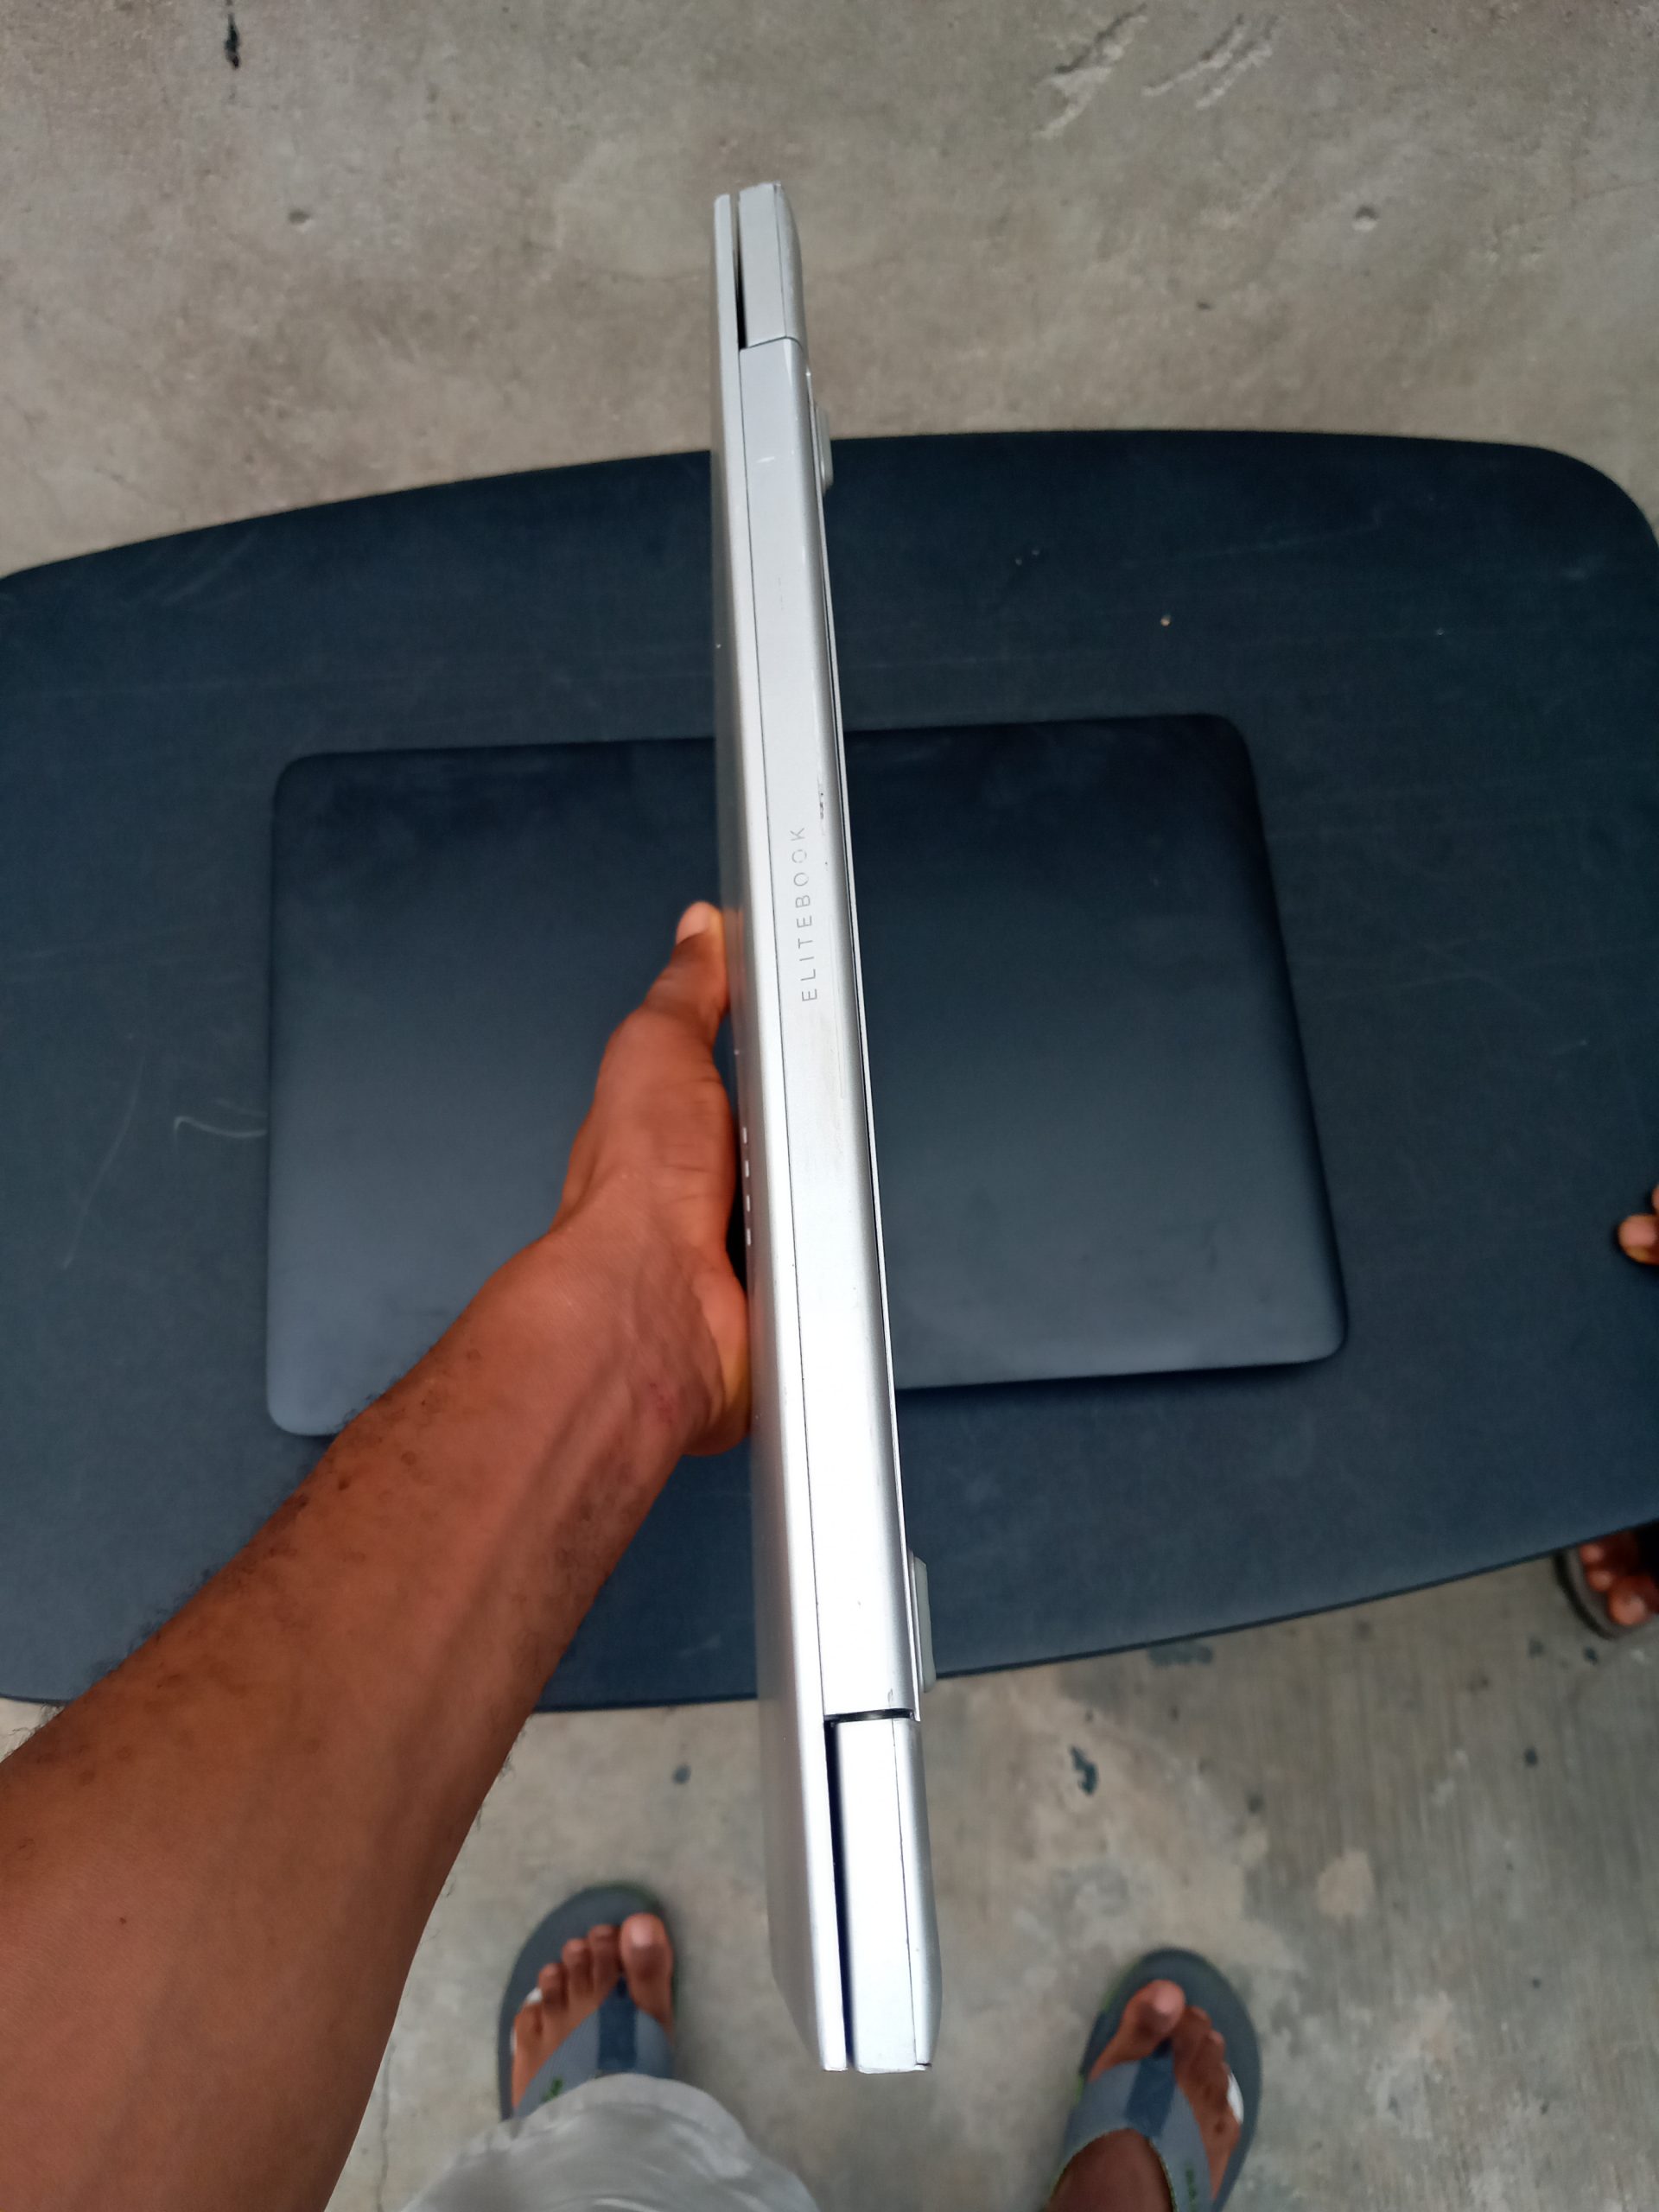 hp elite book 840 g5 eight generation for sale in lagos nigeria, uk used laptops for sale , laptop for sale, latest price for used laptops in lagos nigeria, price for used hp 840 g5 in lagos , affordable HP 840 G5 FOR SALE in lagos